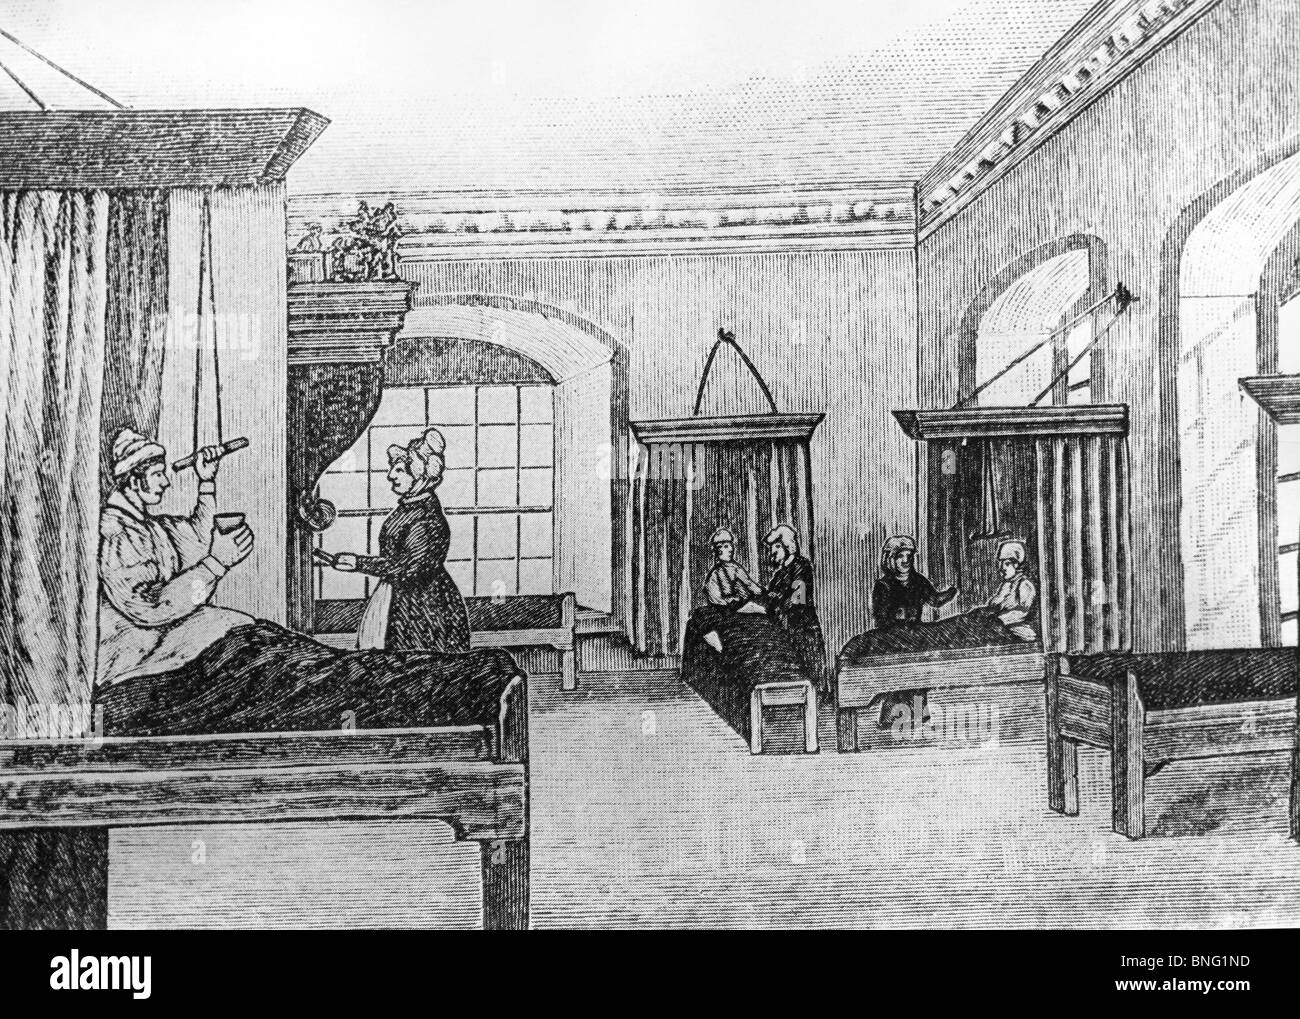 Interior of a British Hospital by artist unknown, ca. 1840 Stock Photo